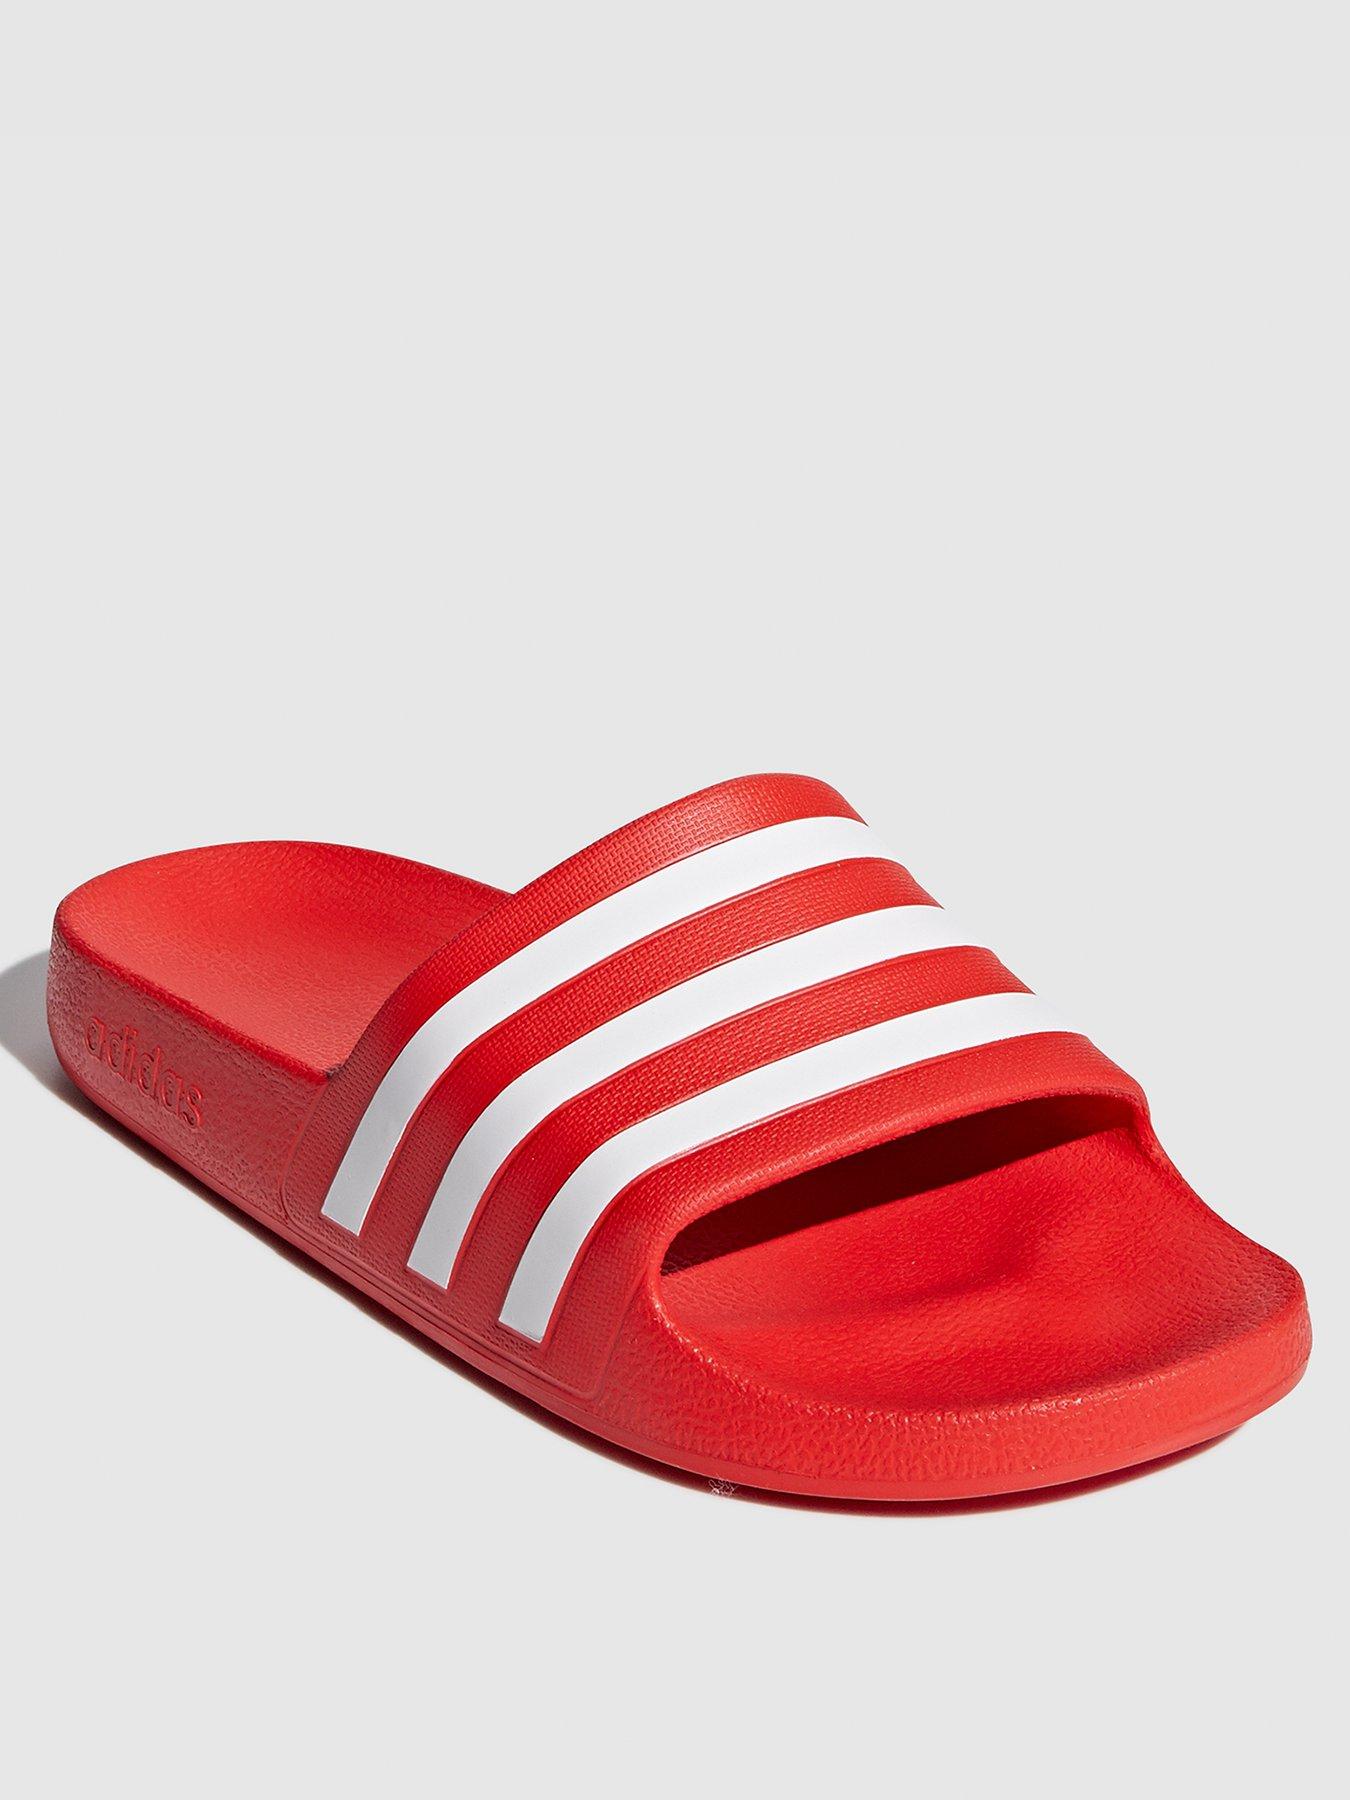 red and white slides